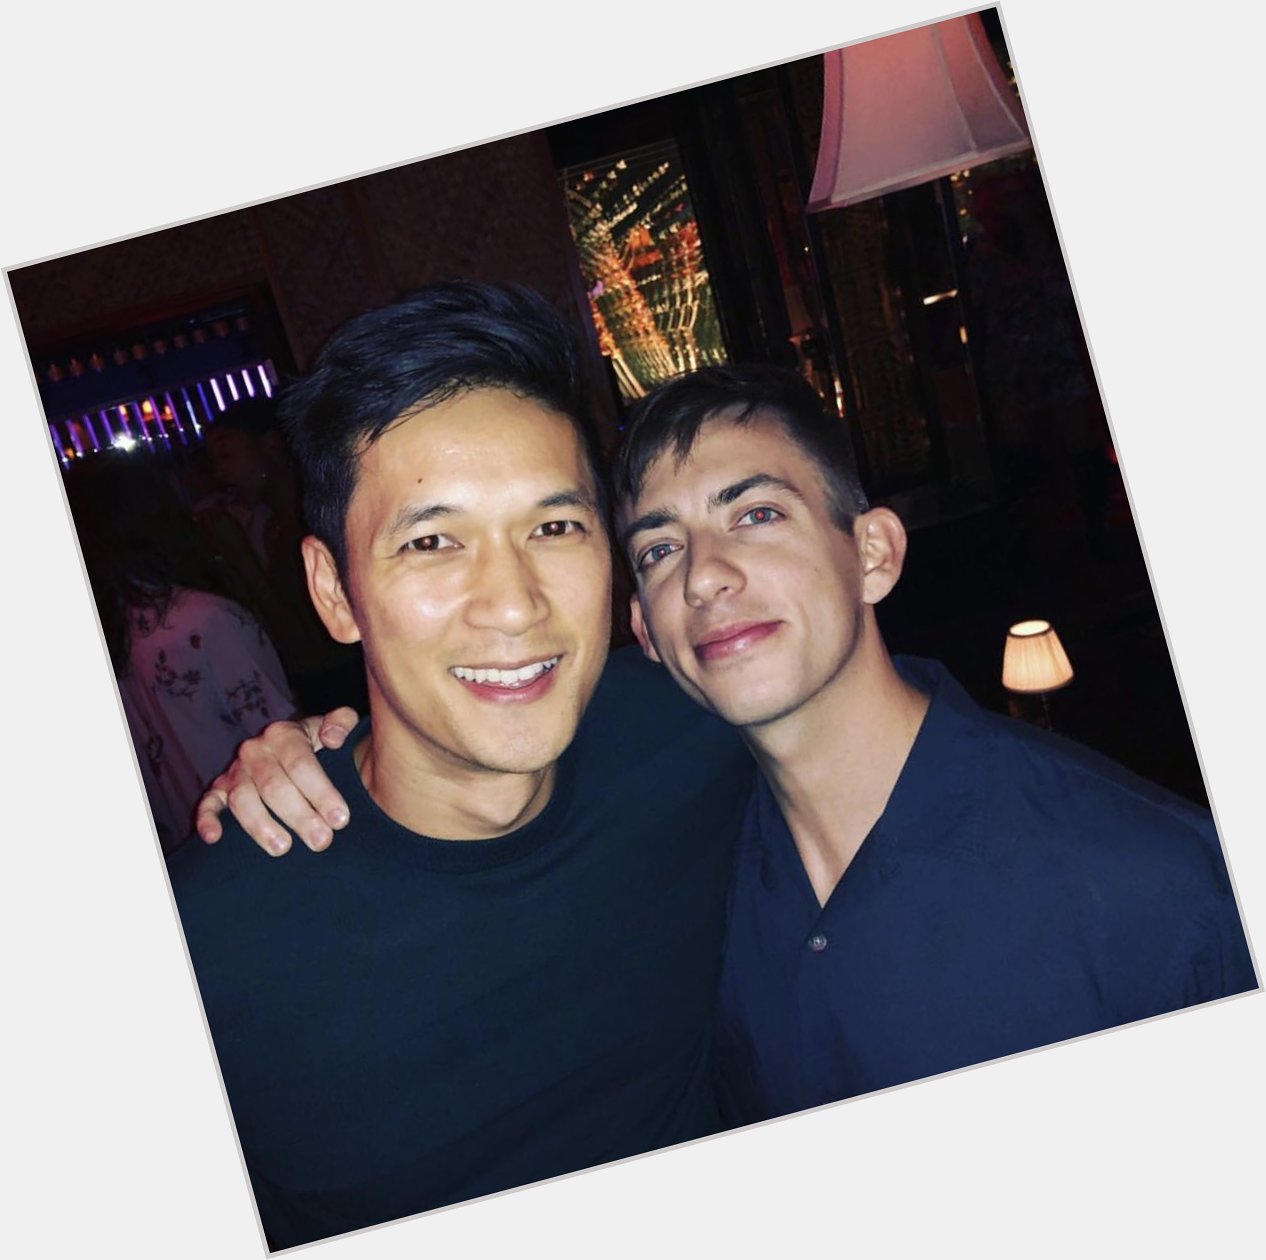 Harry wishing his friend and Glee co-star Kevin McHale a Happy Birthday! 
(via 